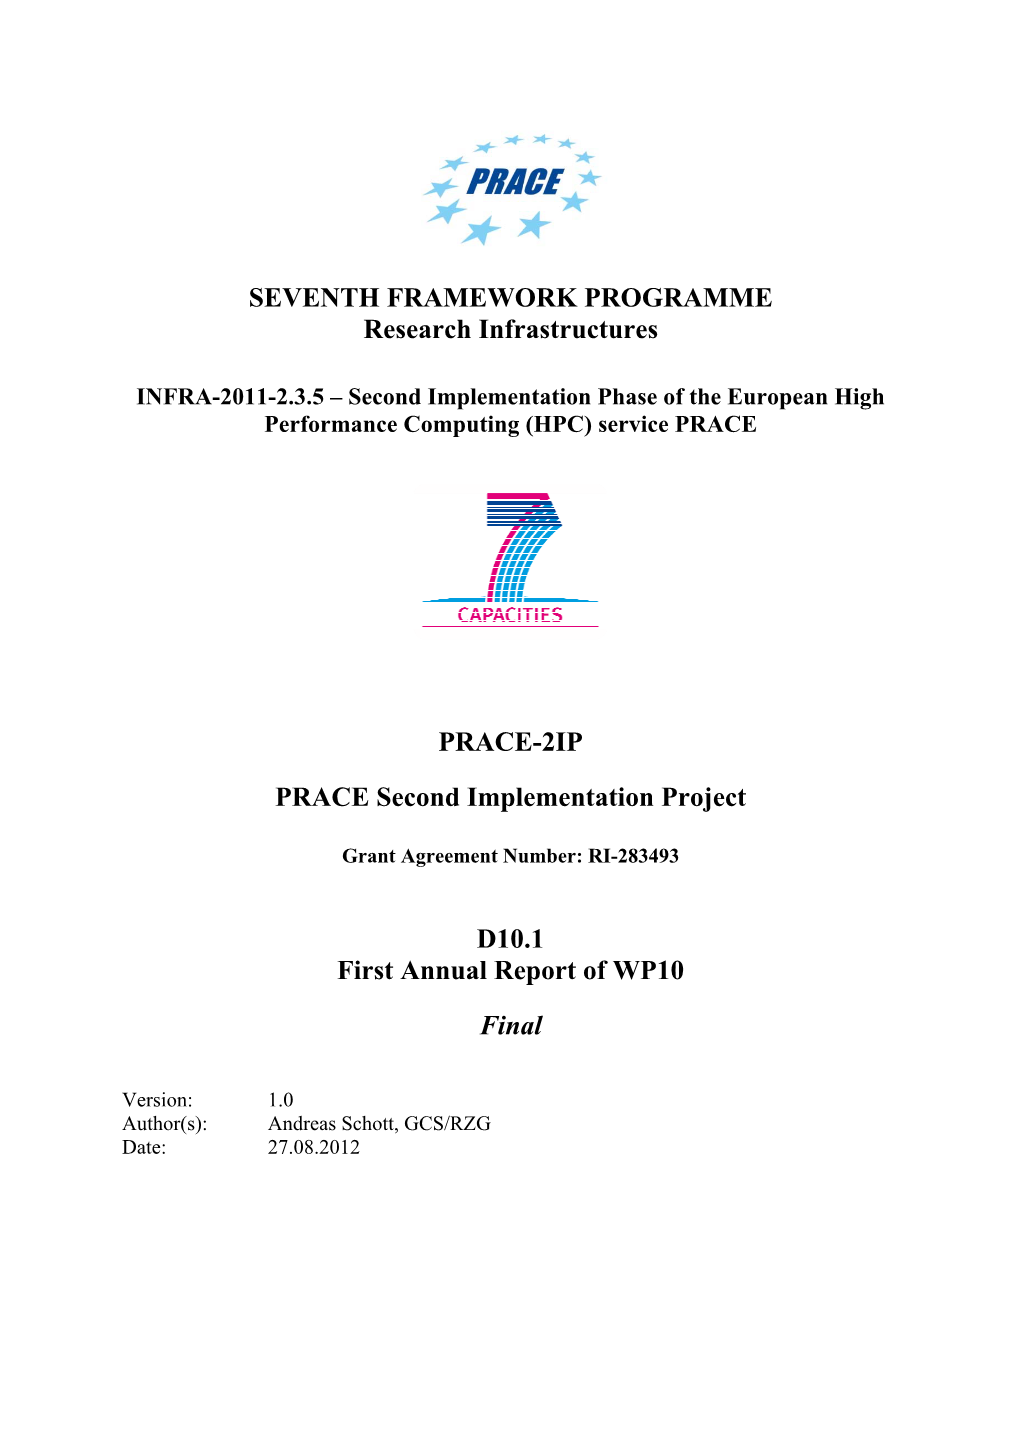 D10.1 First Annual Report of WP10